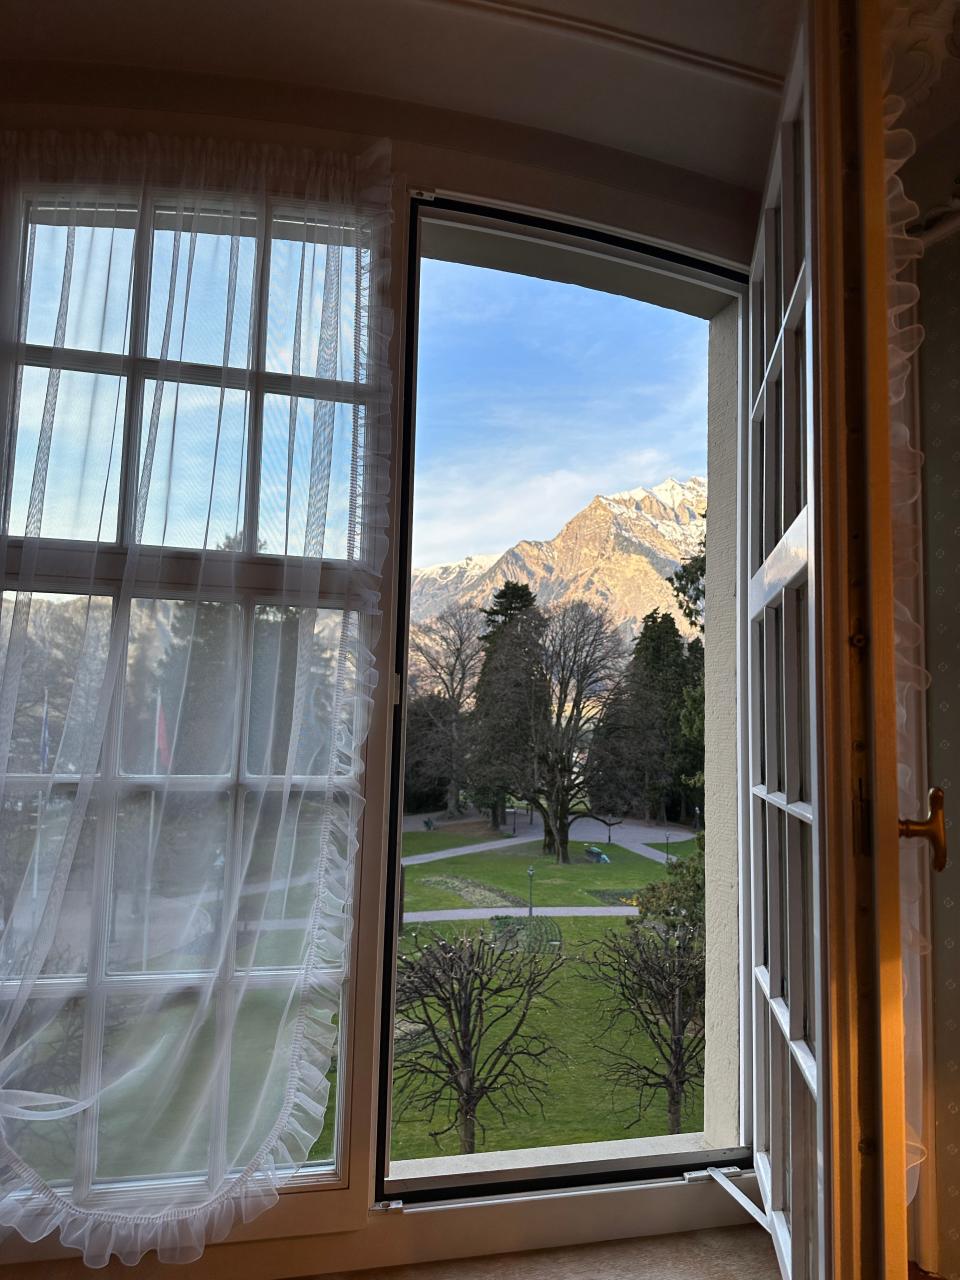 A view of the Swiss town of Bad Ragaz out of a window.